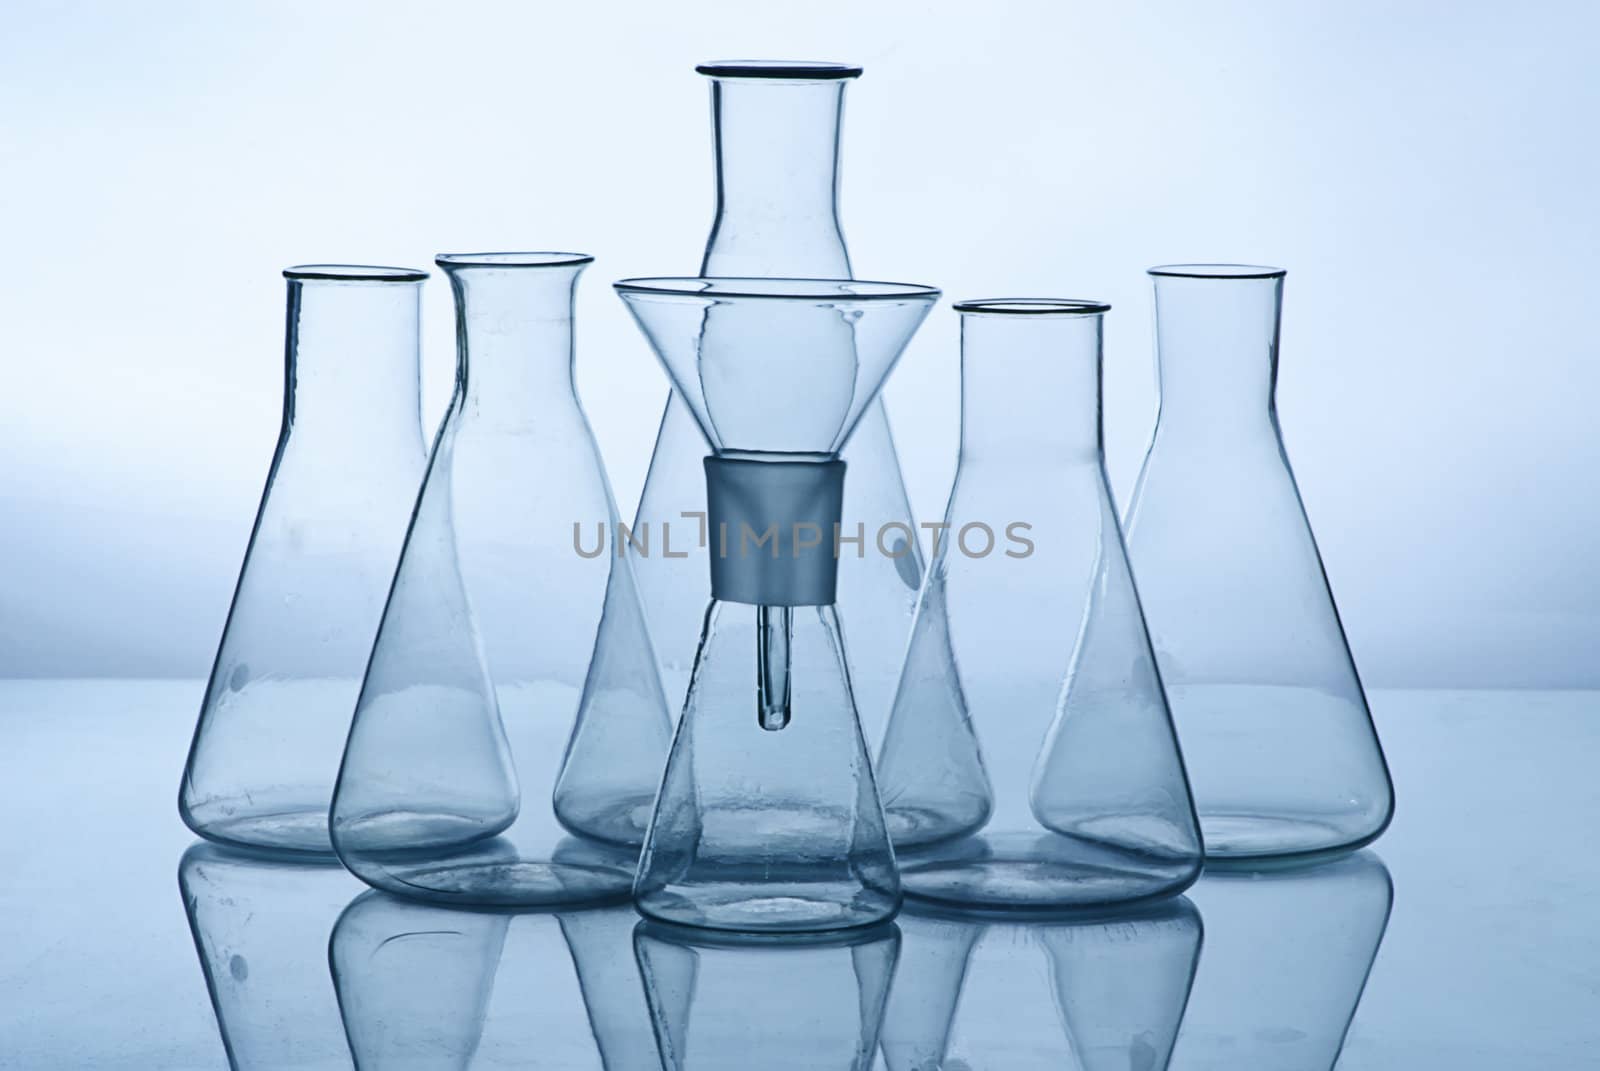 glass laboratory equipment by vikinded